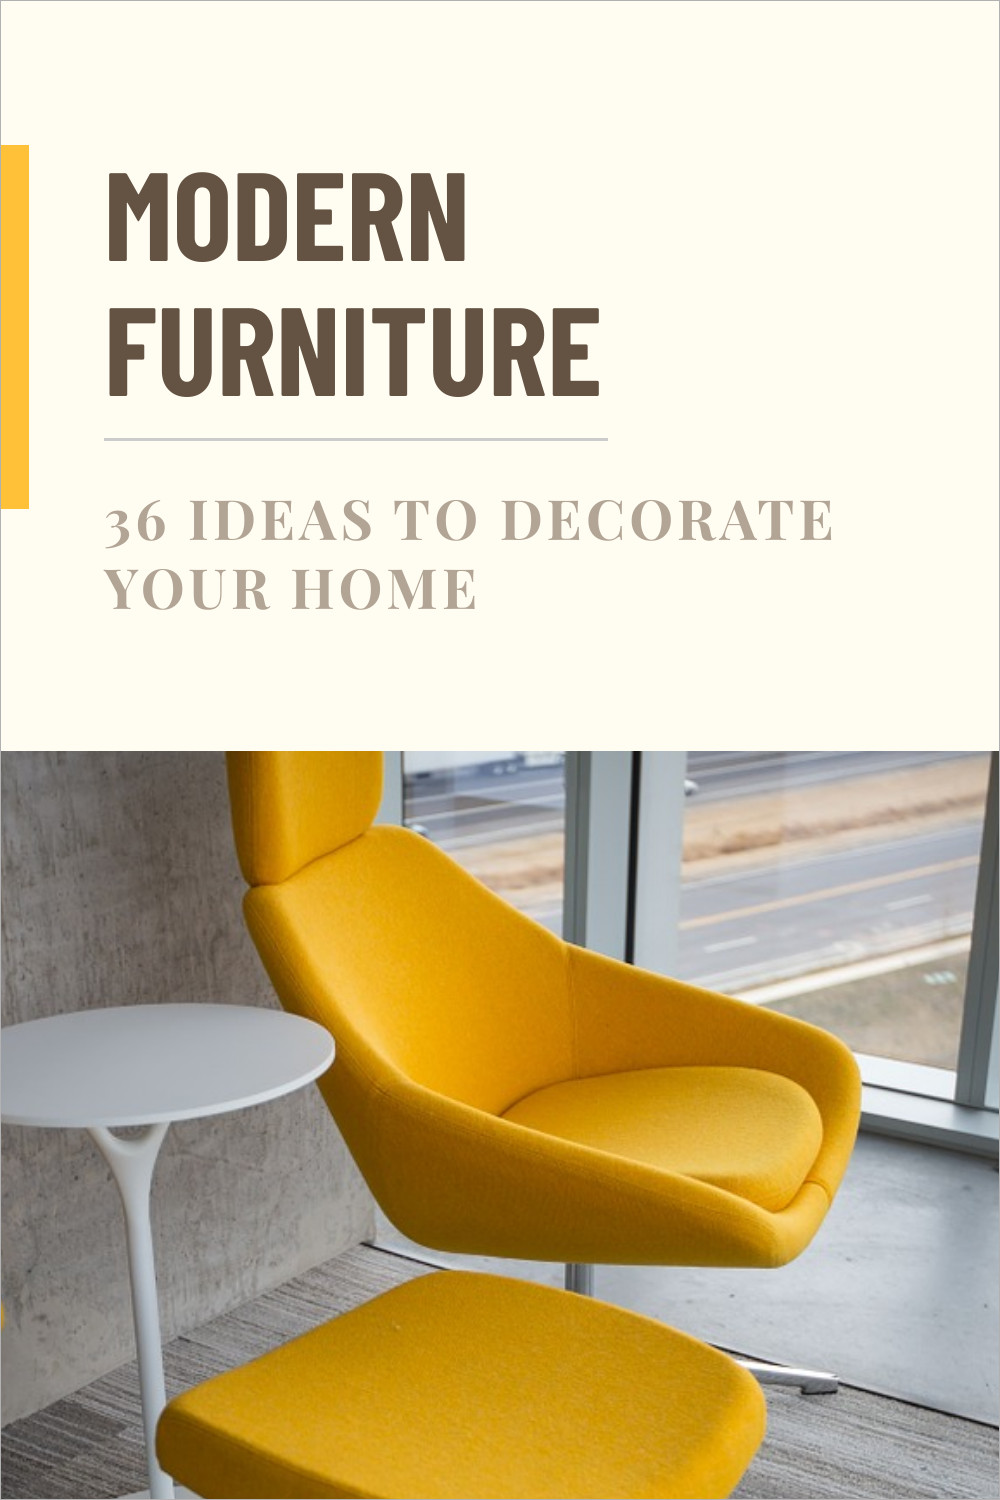 Decorate Your Home with Modern Furniture 